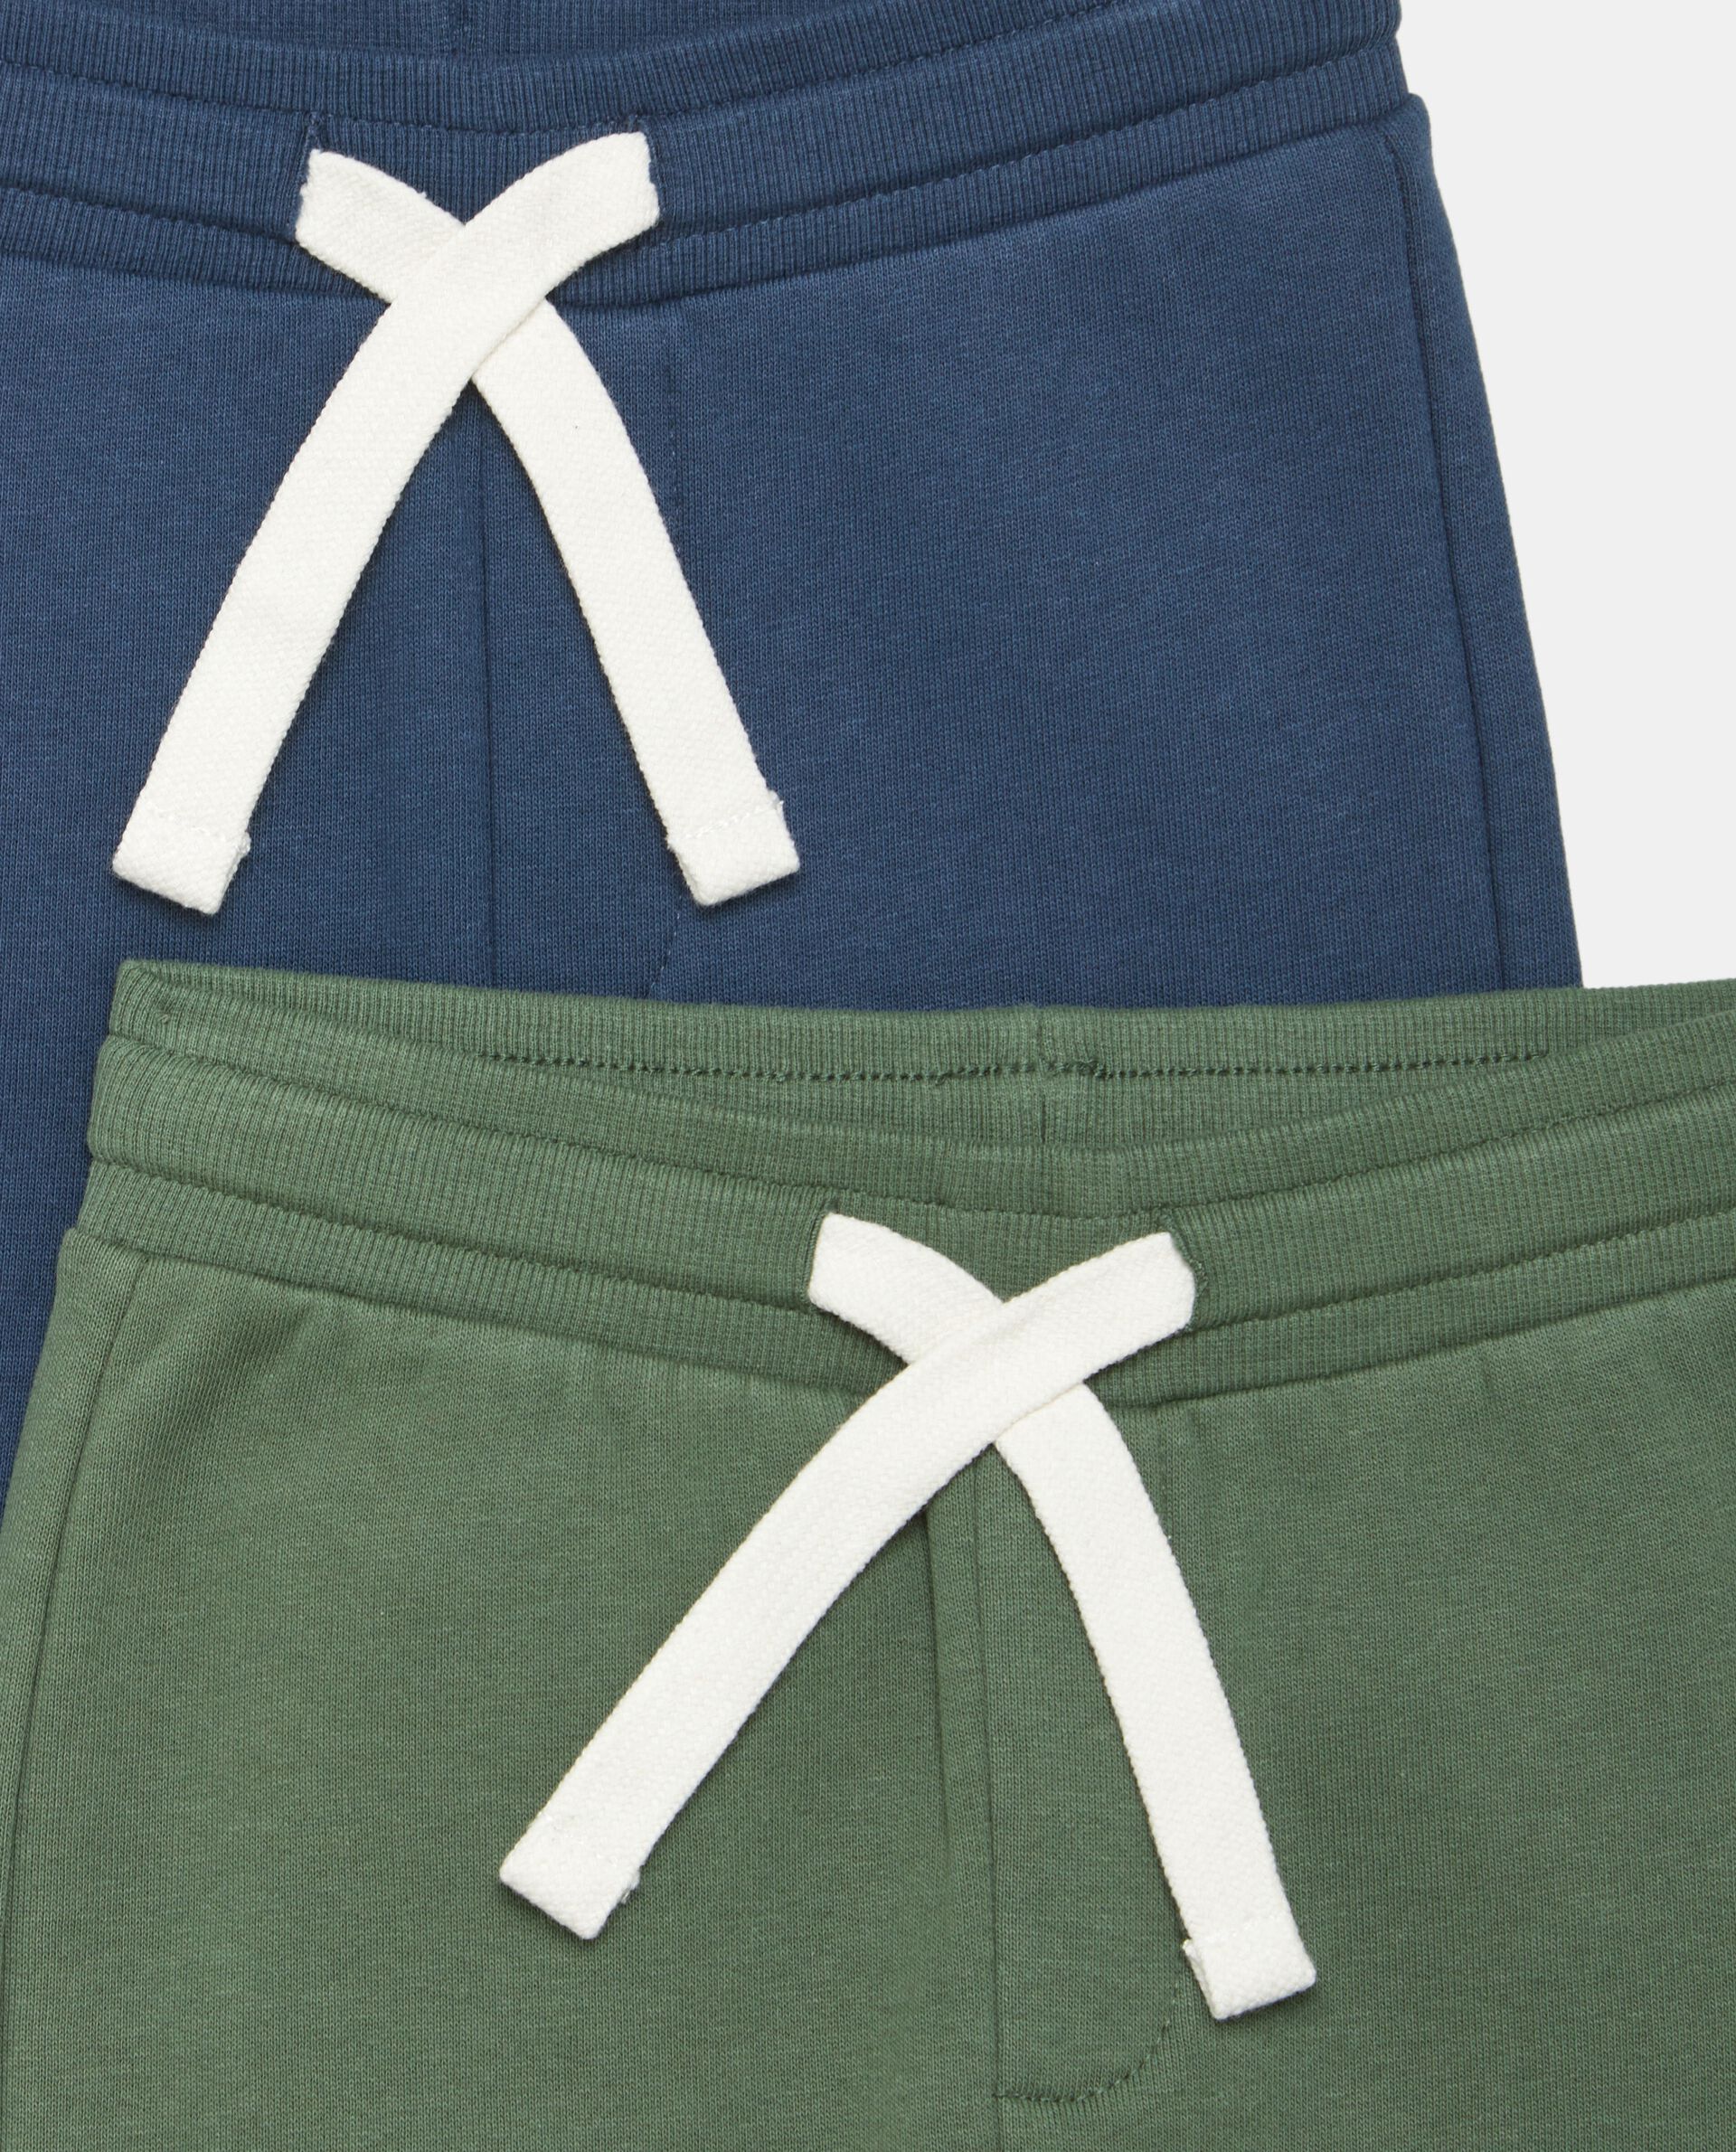 3-7YEARS BOYS' TROUSERS